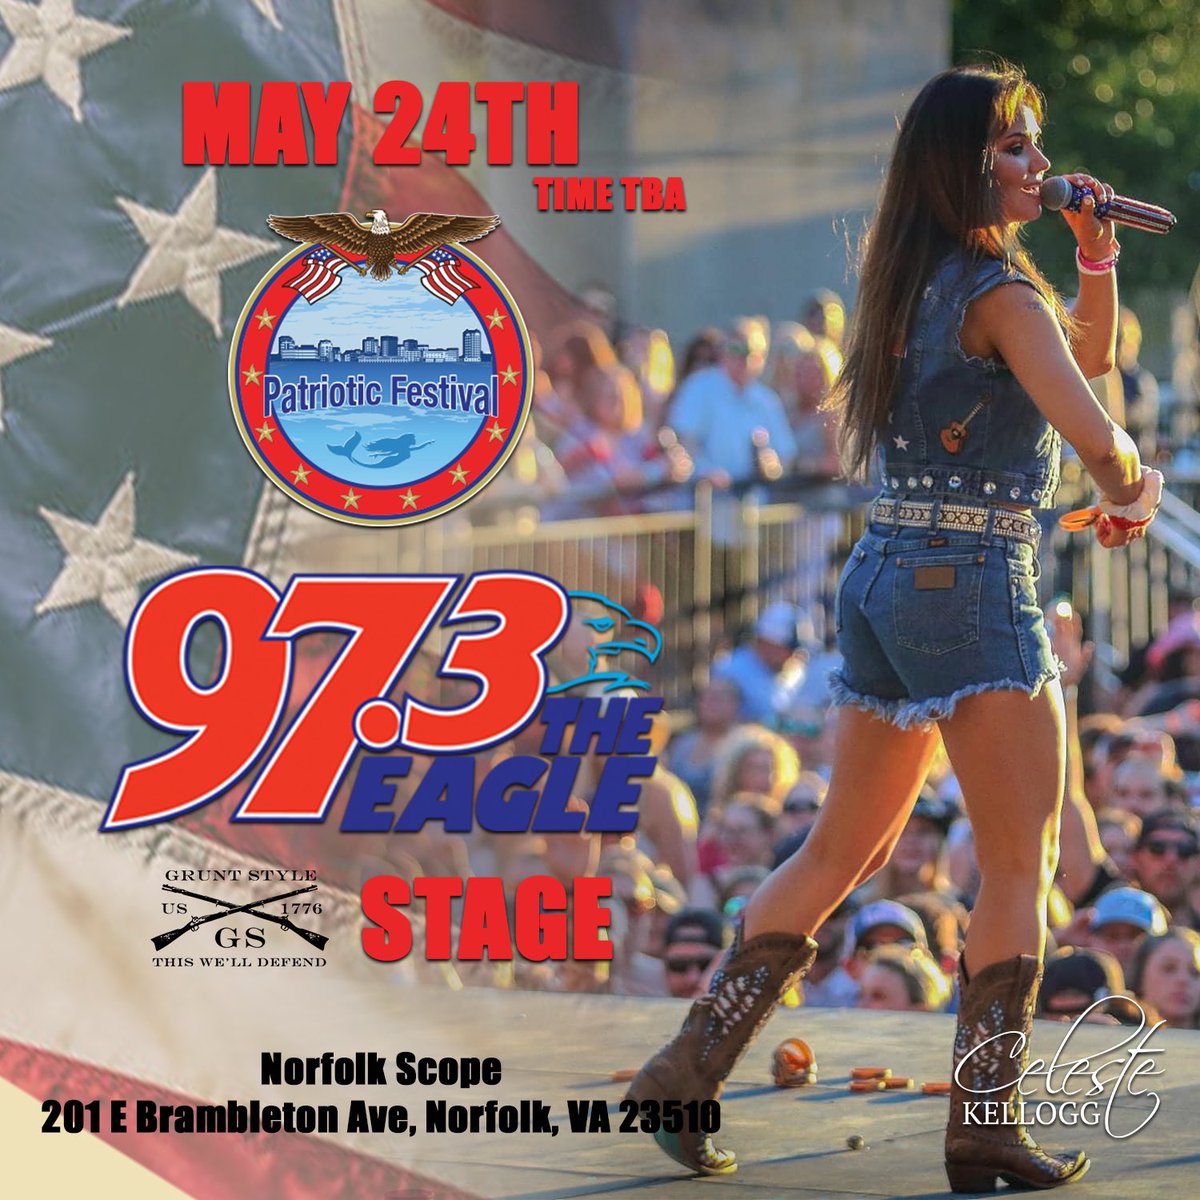 Playing the @973theEAGLE @GruntStyle @PatrioticFest stage today starting at 3:30!!!! We’ll be there until 6! Come hang out and party with us at the concert before the concert on Scope Plaza!